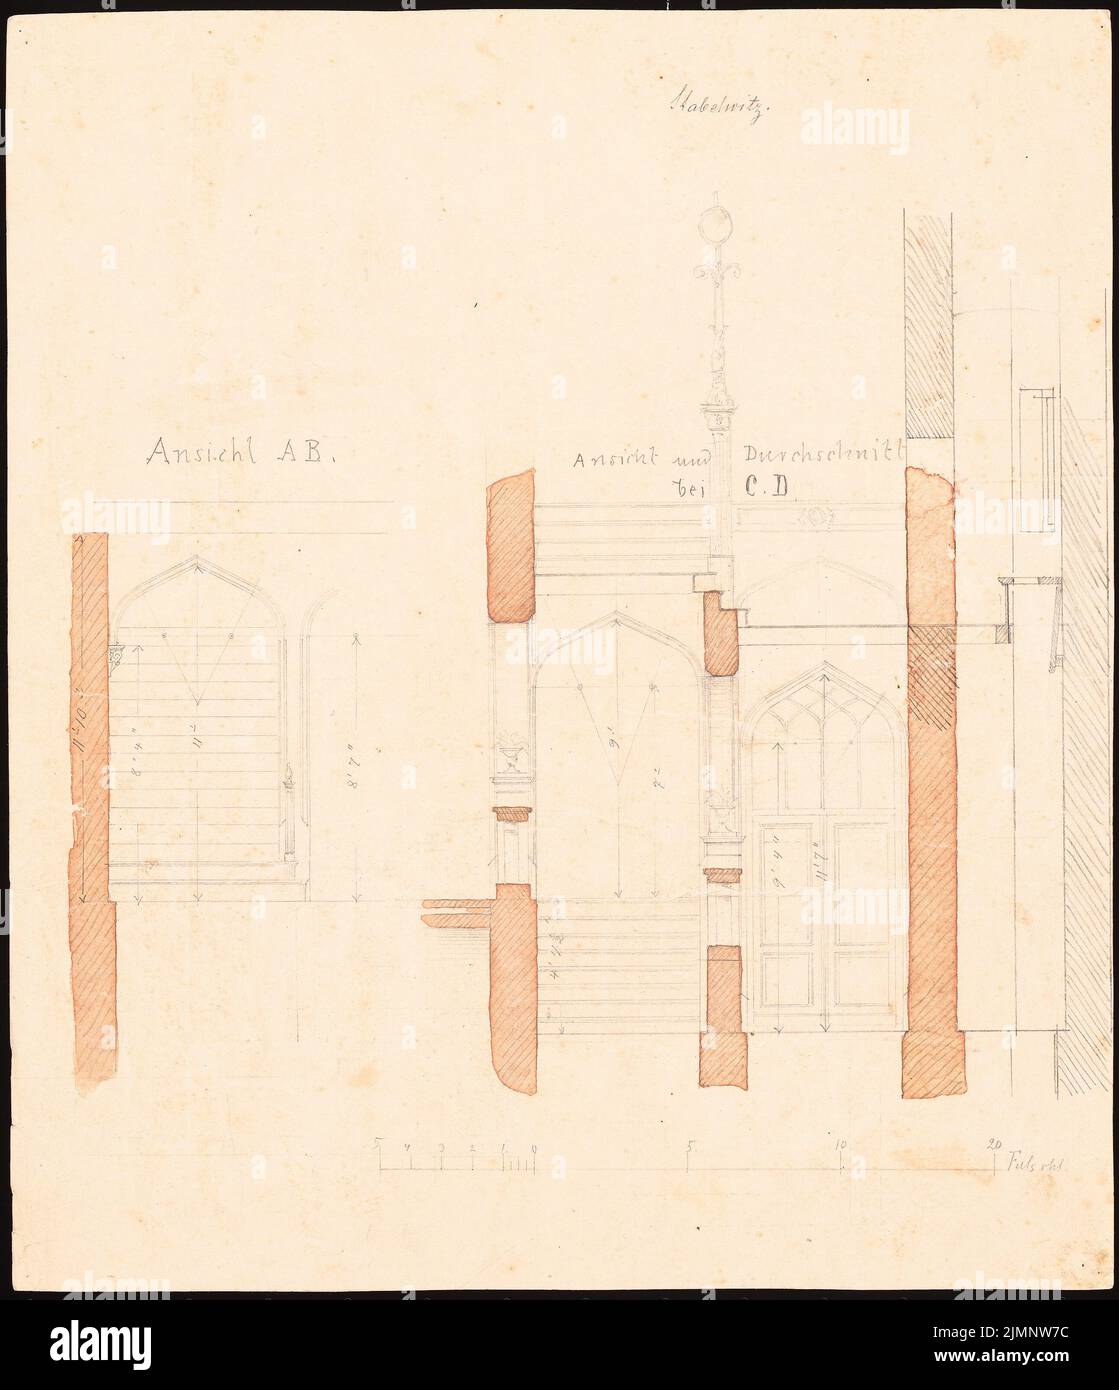 Lüdecke Carl Johann Bogislaw (1826-1894), Castle in Stabelwitz. Expansion (1870): Riss A - B, Upper C - D, cut stairs with door, scale strip (foot Rhl.). Back: Sketches with pencil. Pencil watercolor on the box, 39.6 x 34.1 cm (including scan edges) Lüdecke Carl Johann Bogislaw  (1826-1894): Schloss Stabelwitz. Erweiterung Stock Photo